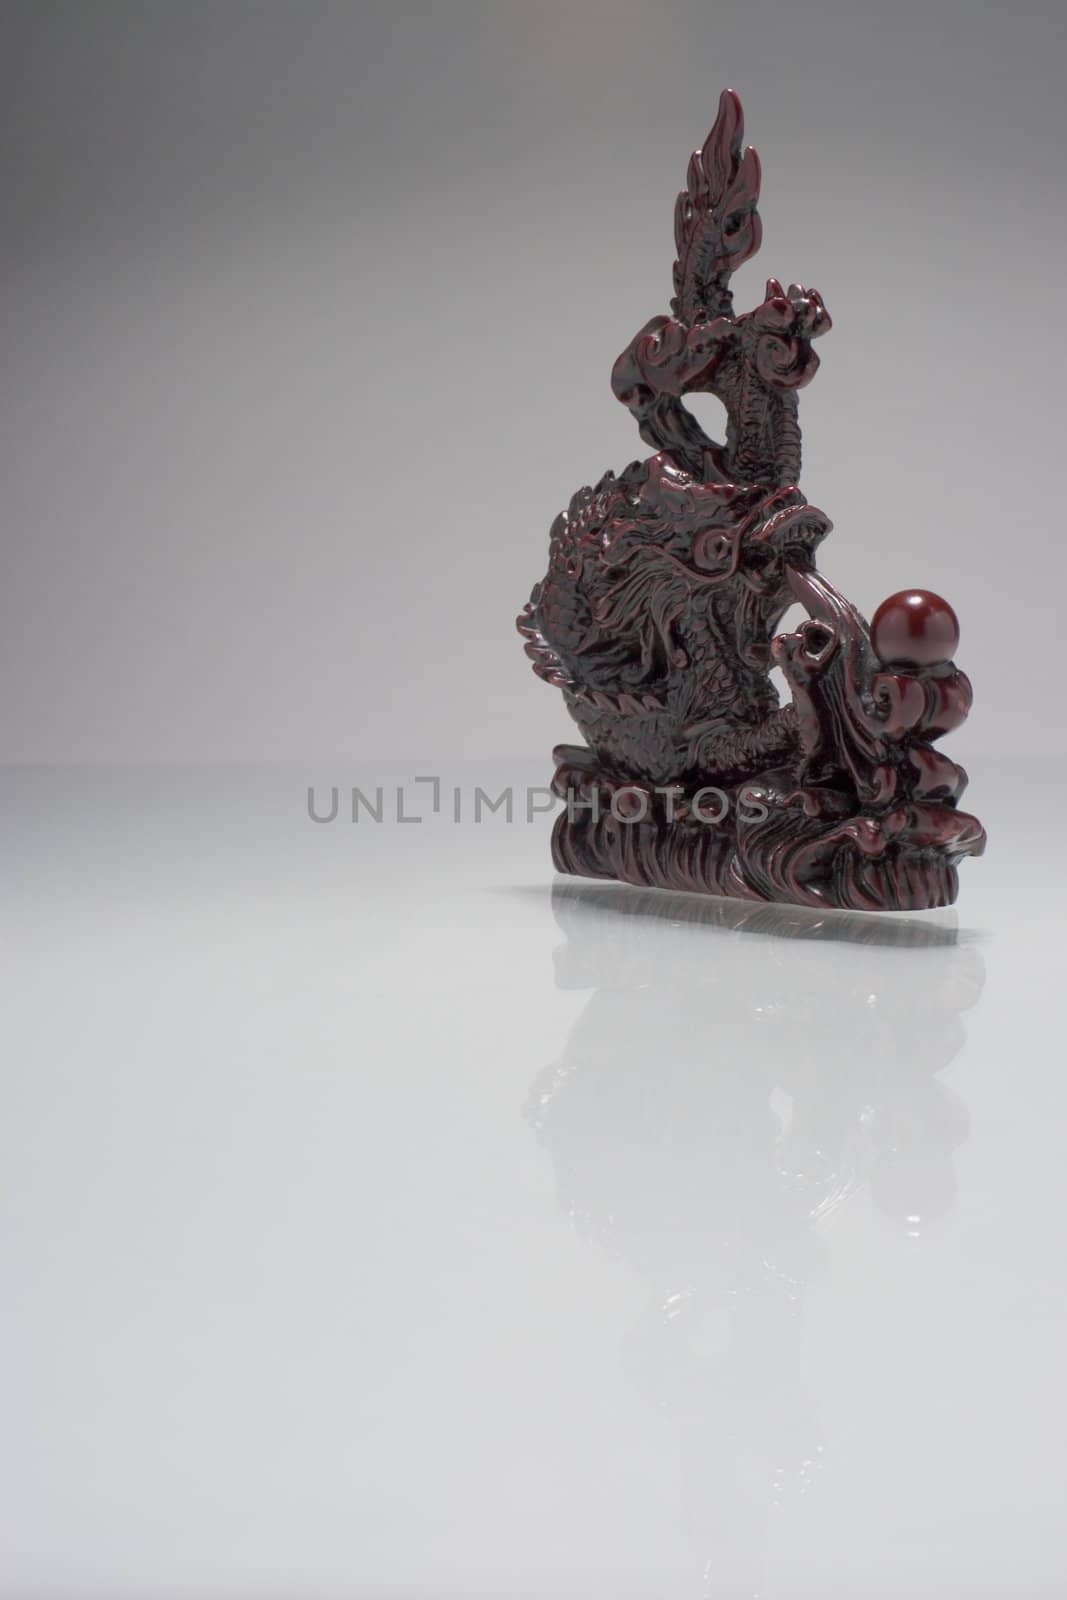 Asian dragon statue floating on a white reflective surface